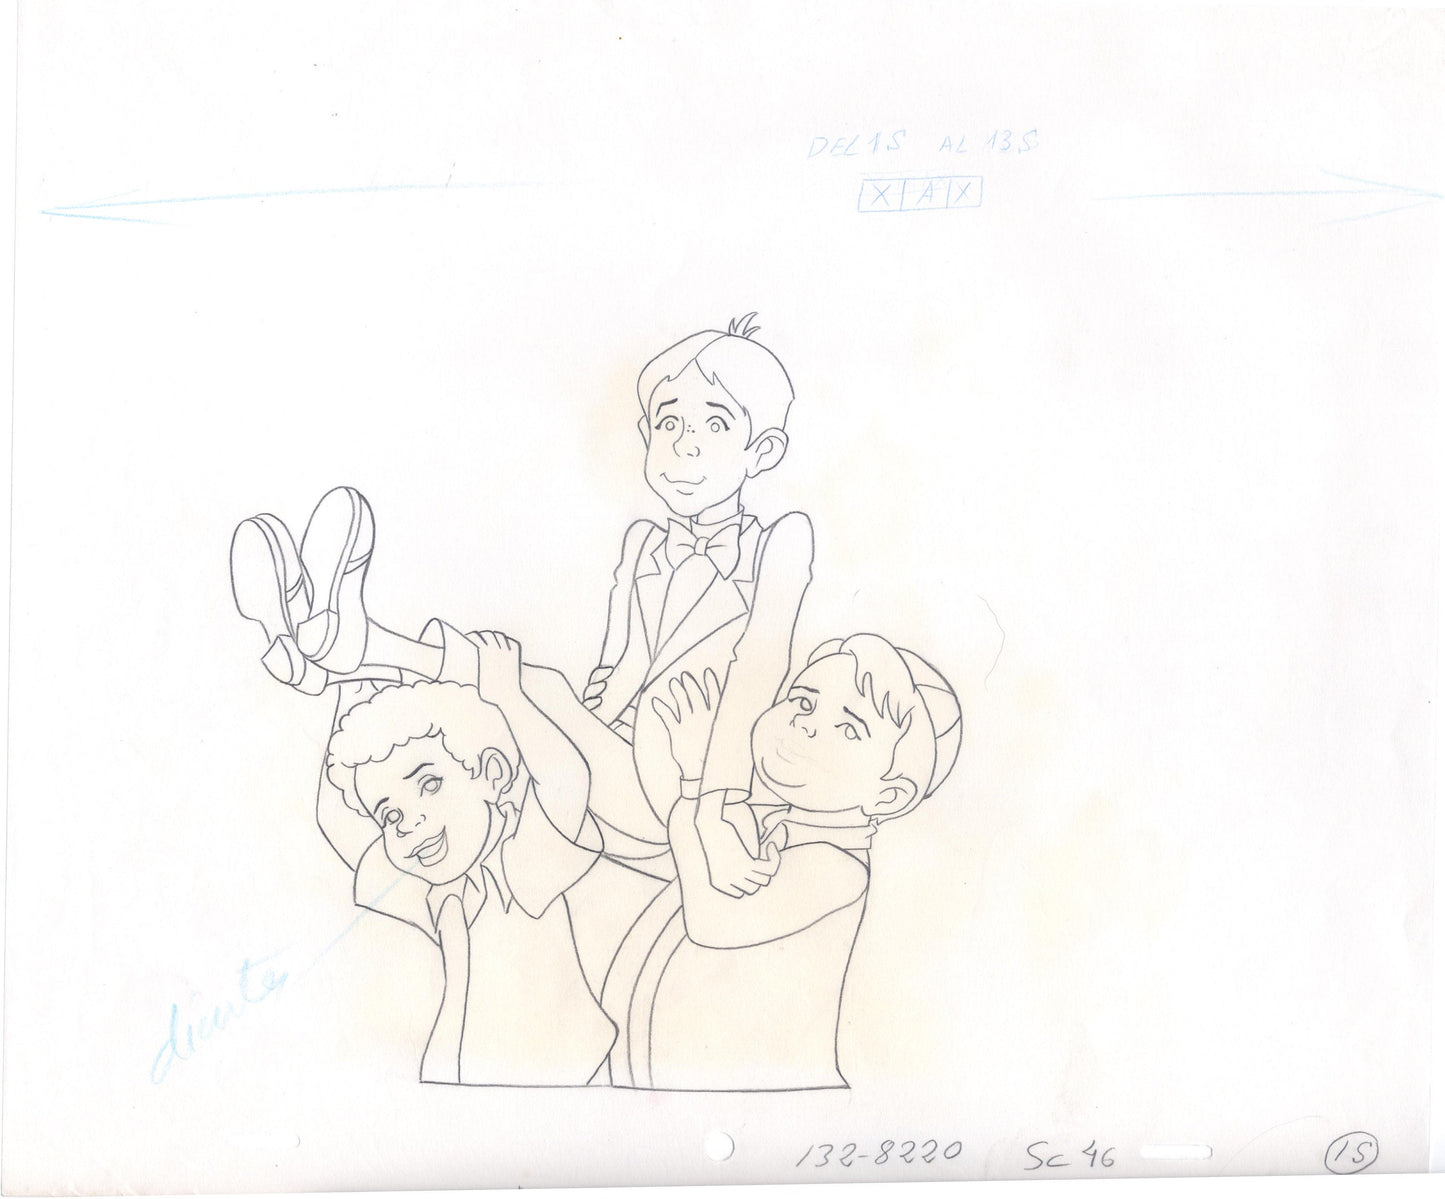 Little Rascals Production Animation Cel Drawing with Alfalfa from Hanna Barbera 1982-83 46